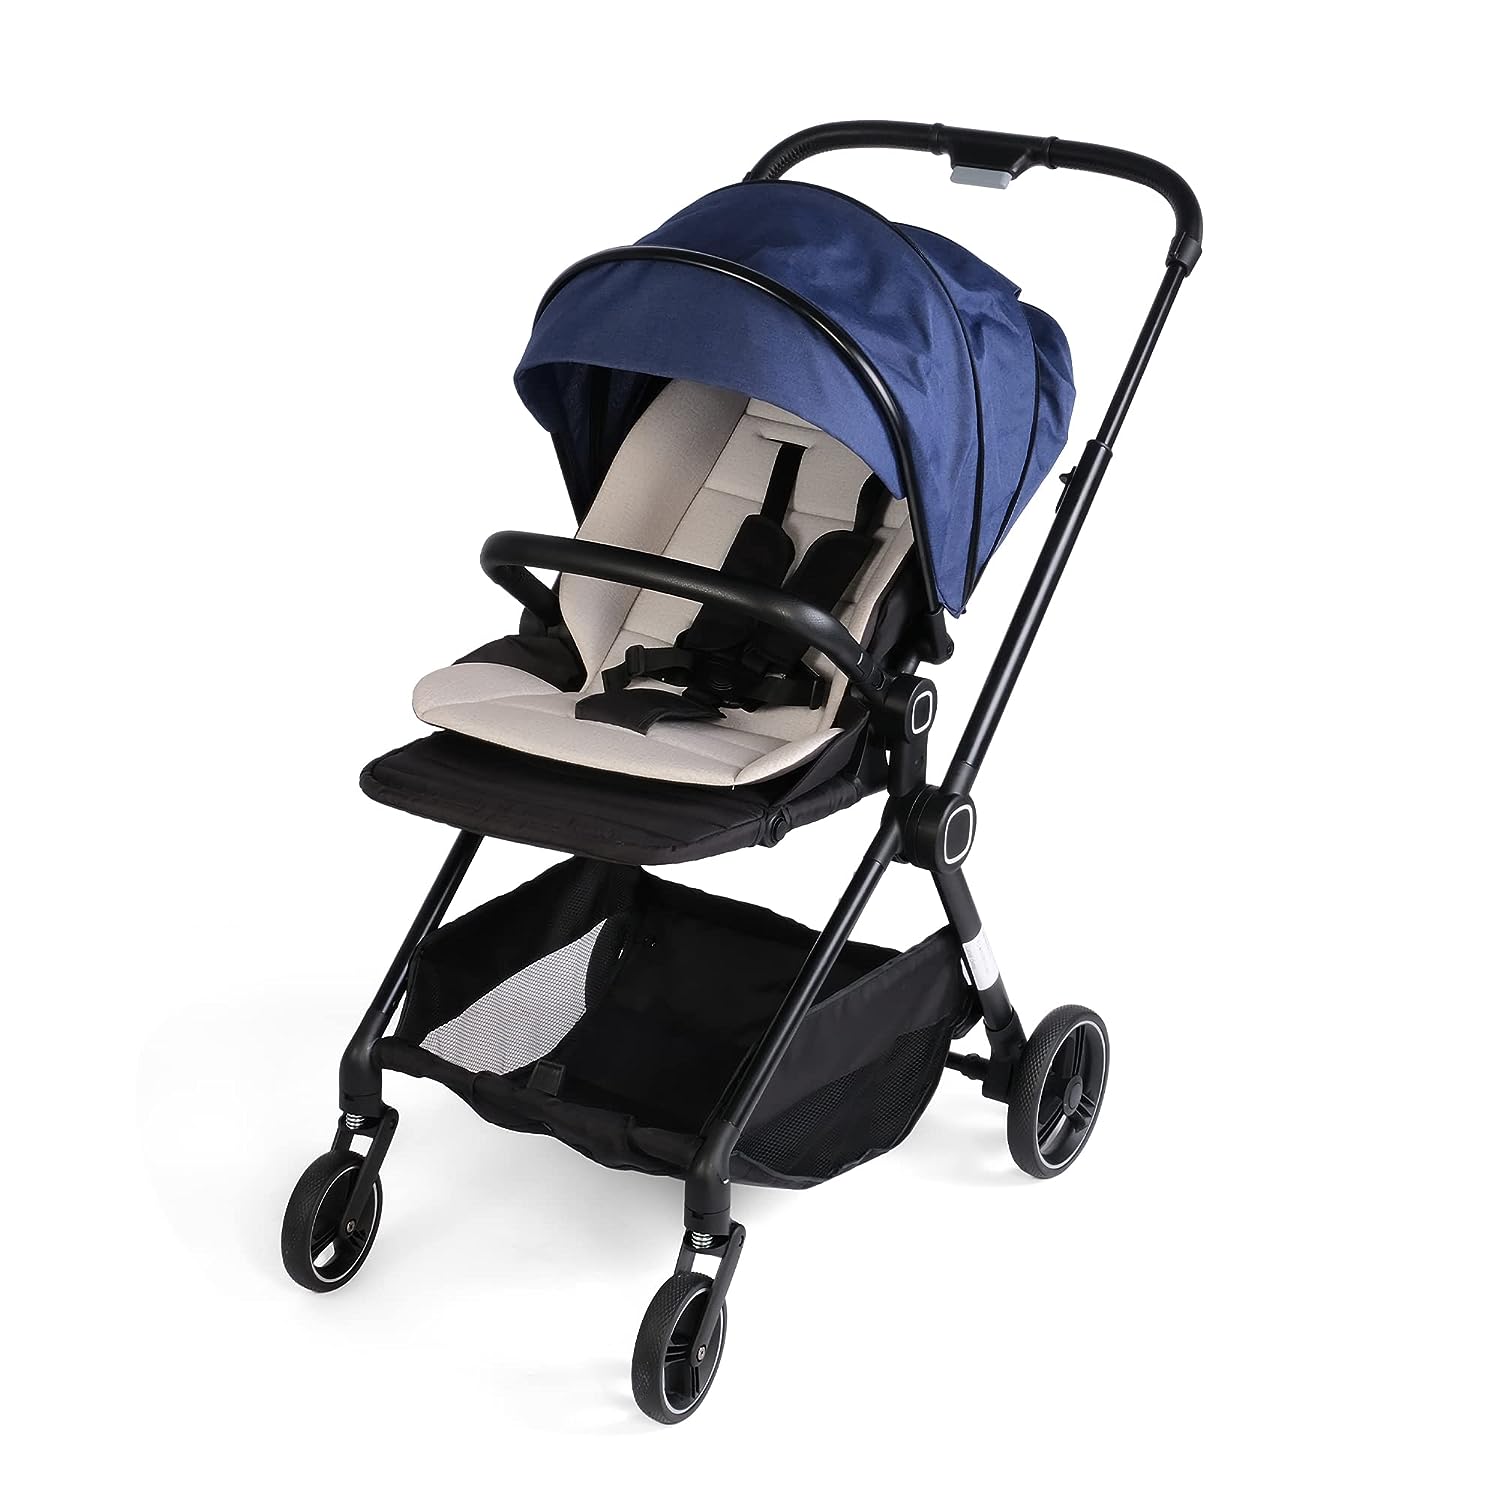 Easy Fold Baby Stroller Lightweight High Landscape Infant Pushchair with Reversible Seat, Blue